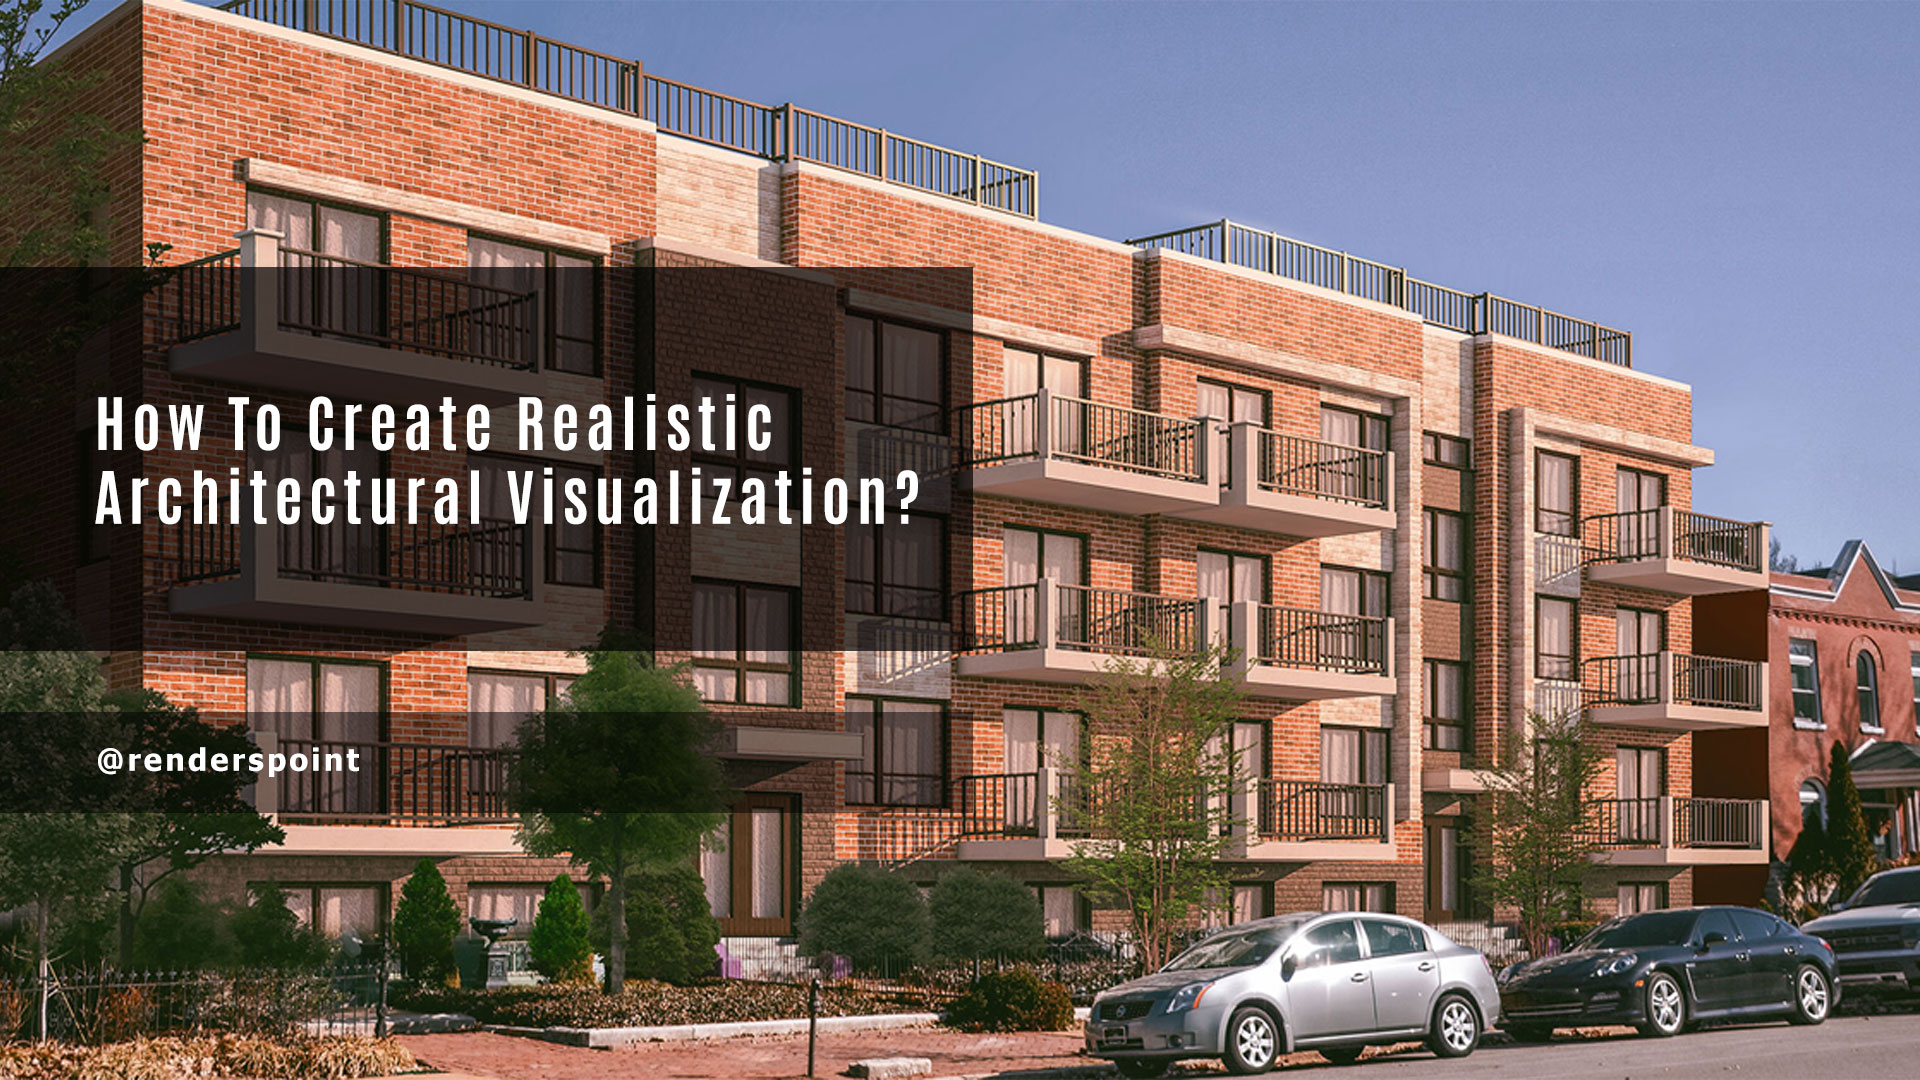 How to Create Realistic Architectural Visualization?